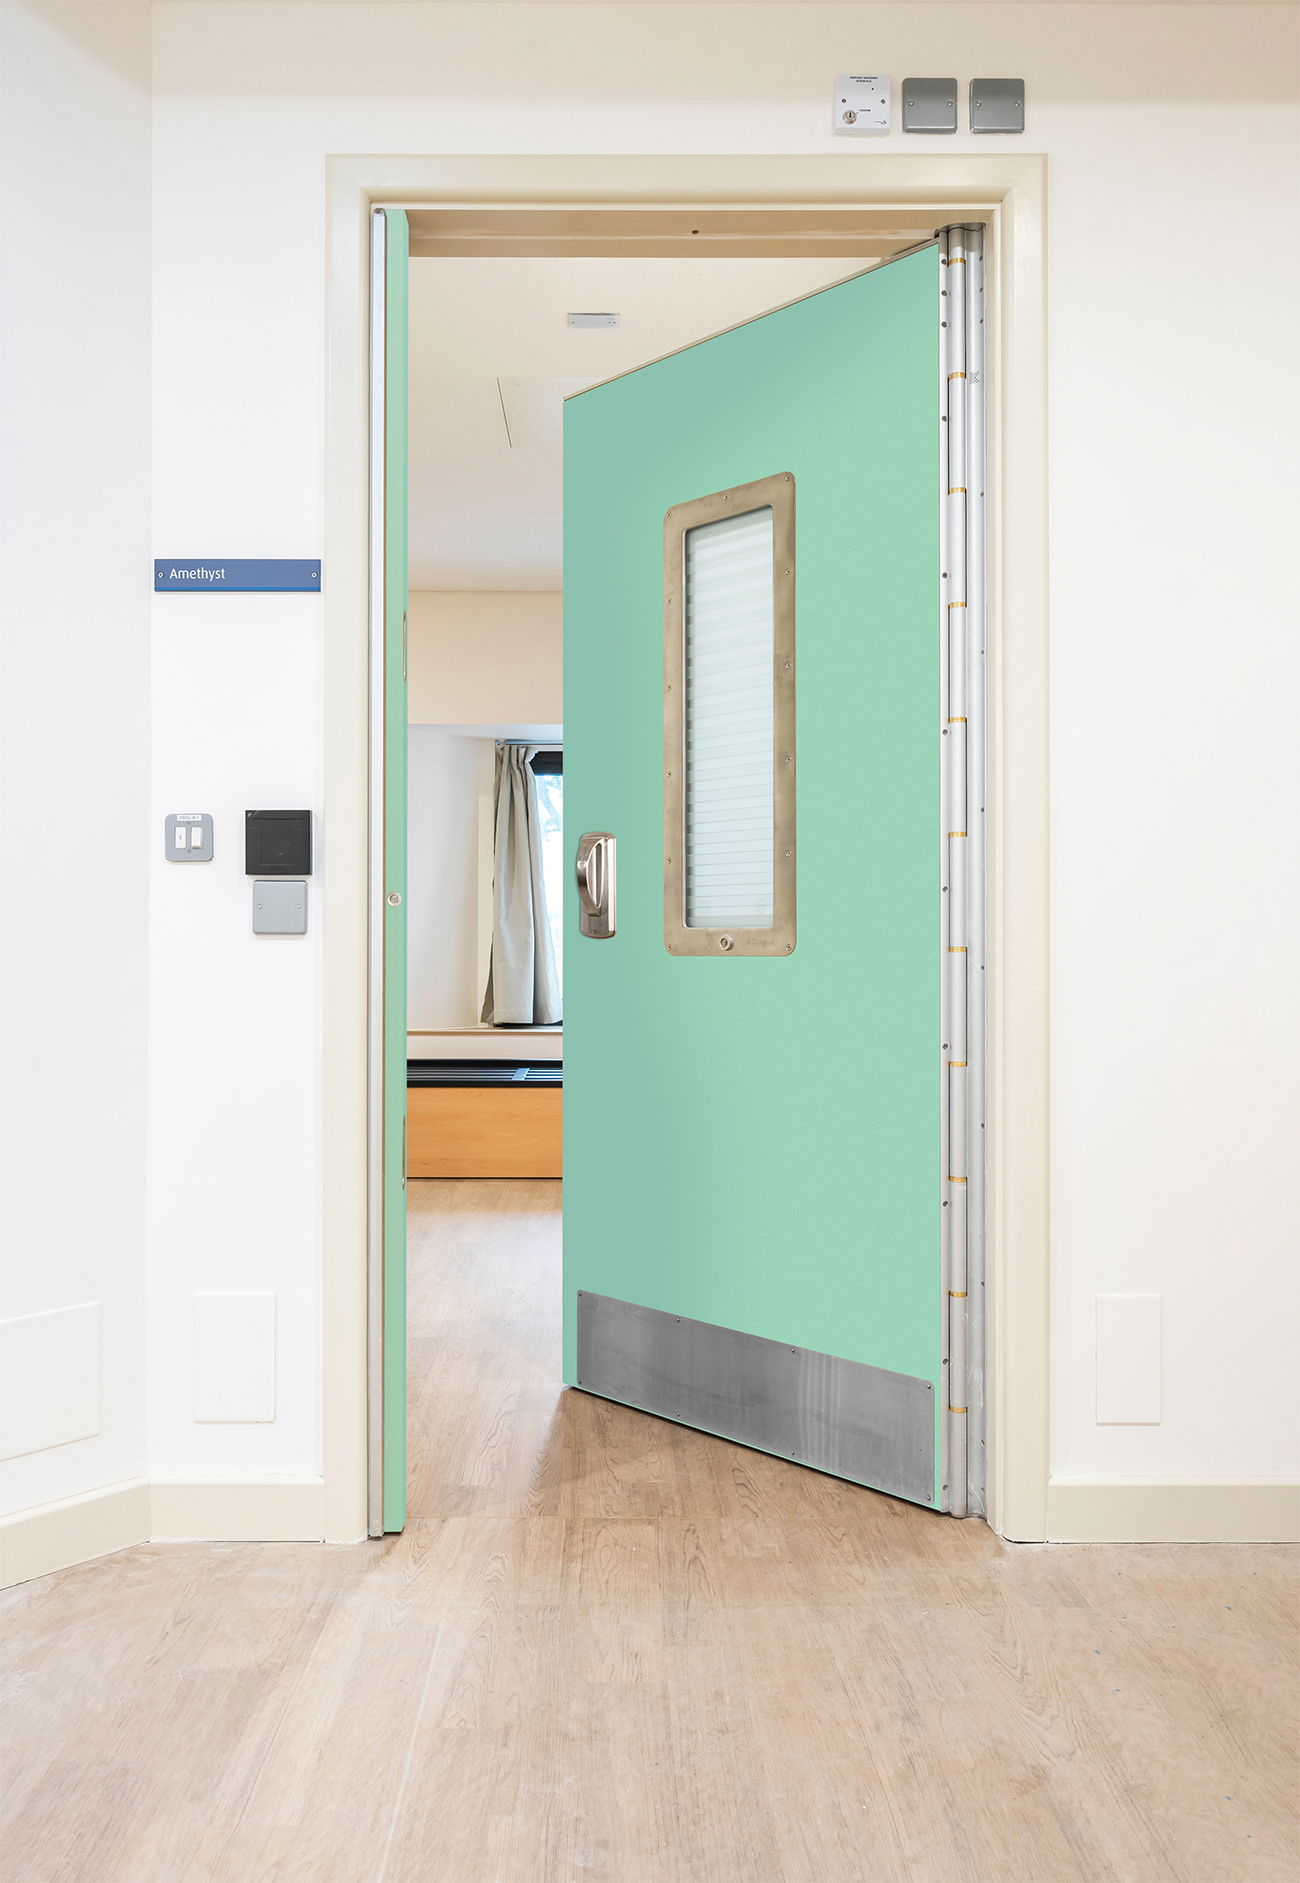 The SWING anti-barricade door system with ligature resistant design for behavioral health and challenging environments.